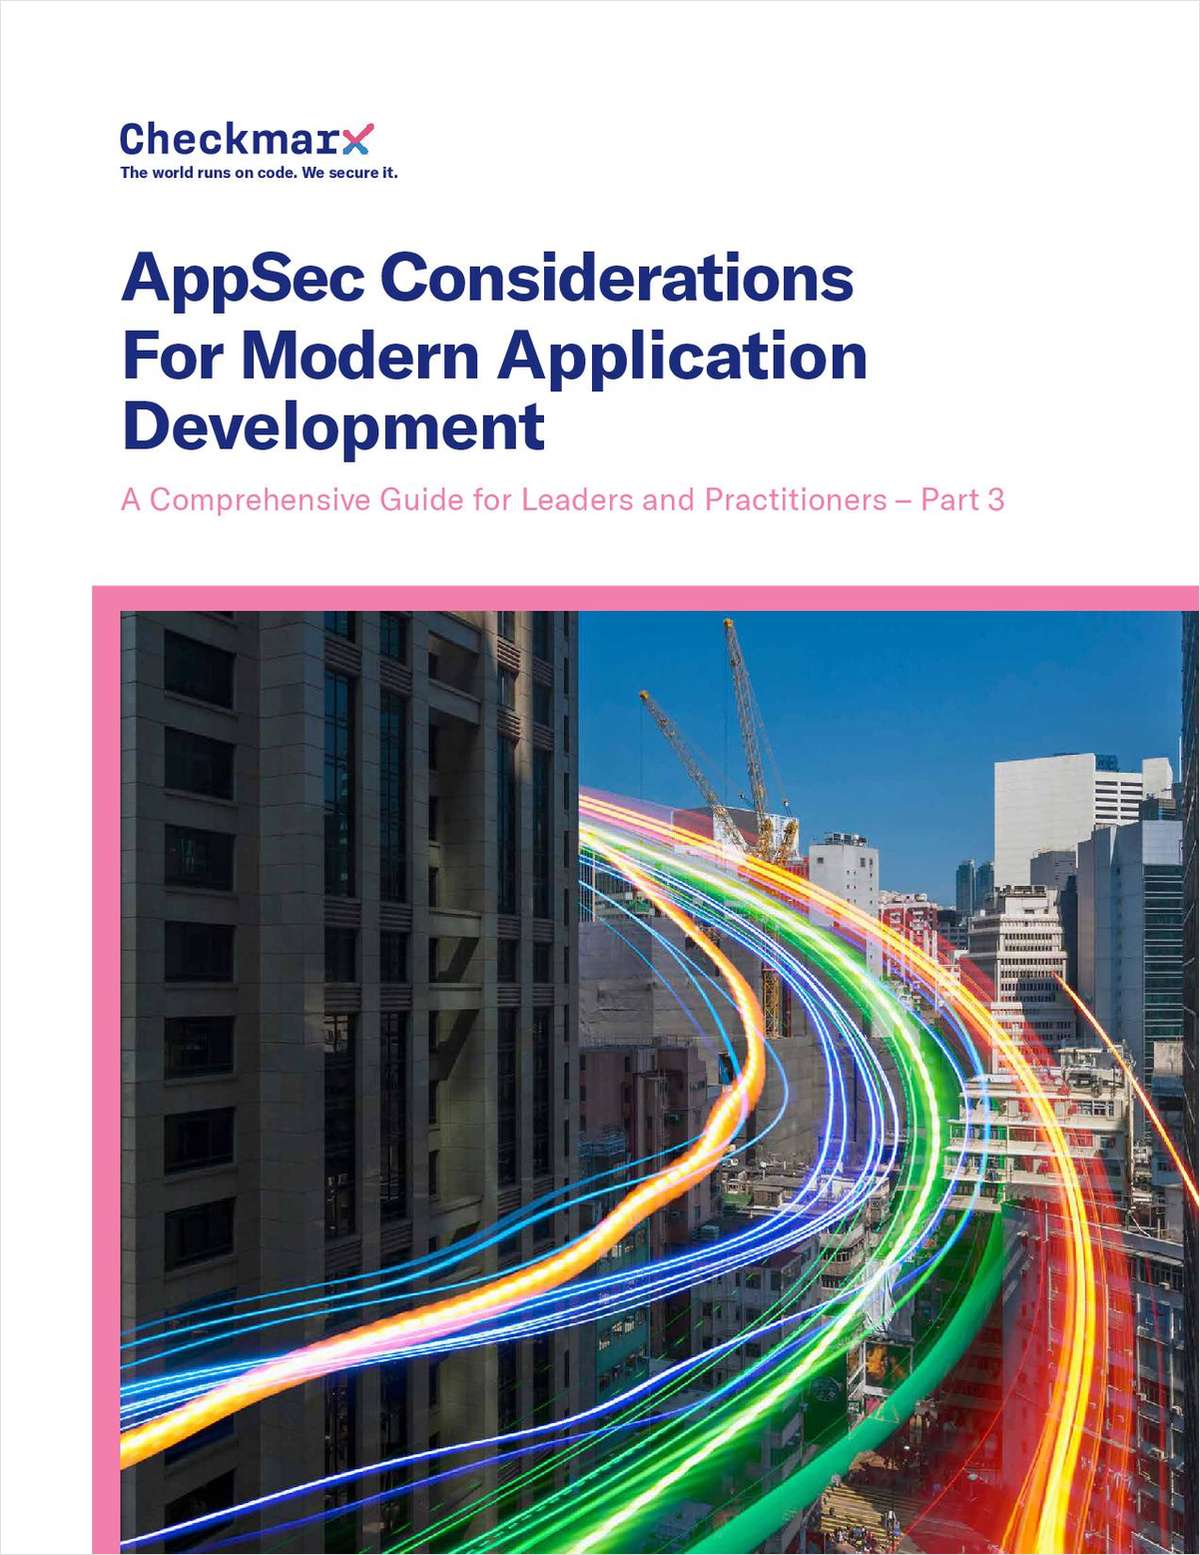 AppSec Considerations For Modern Application Development(MAD)